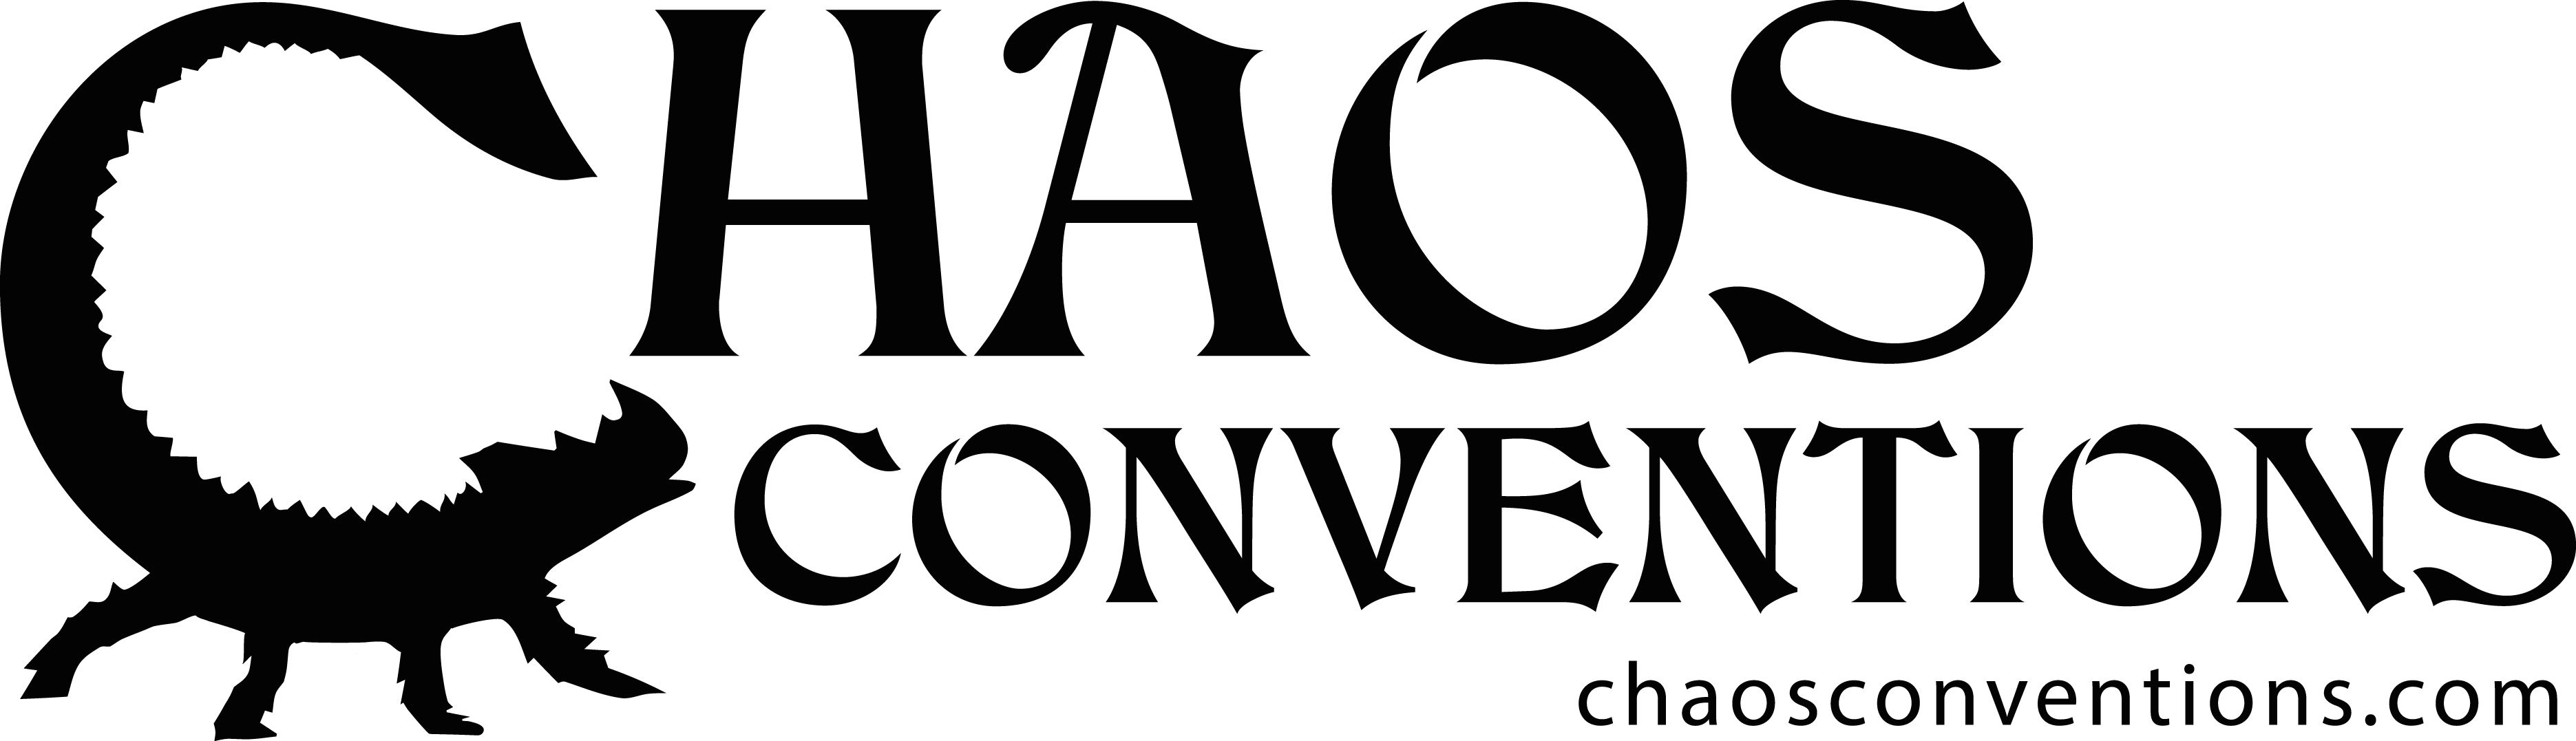 chaos-conventions-logo.png